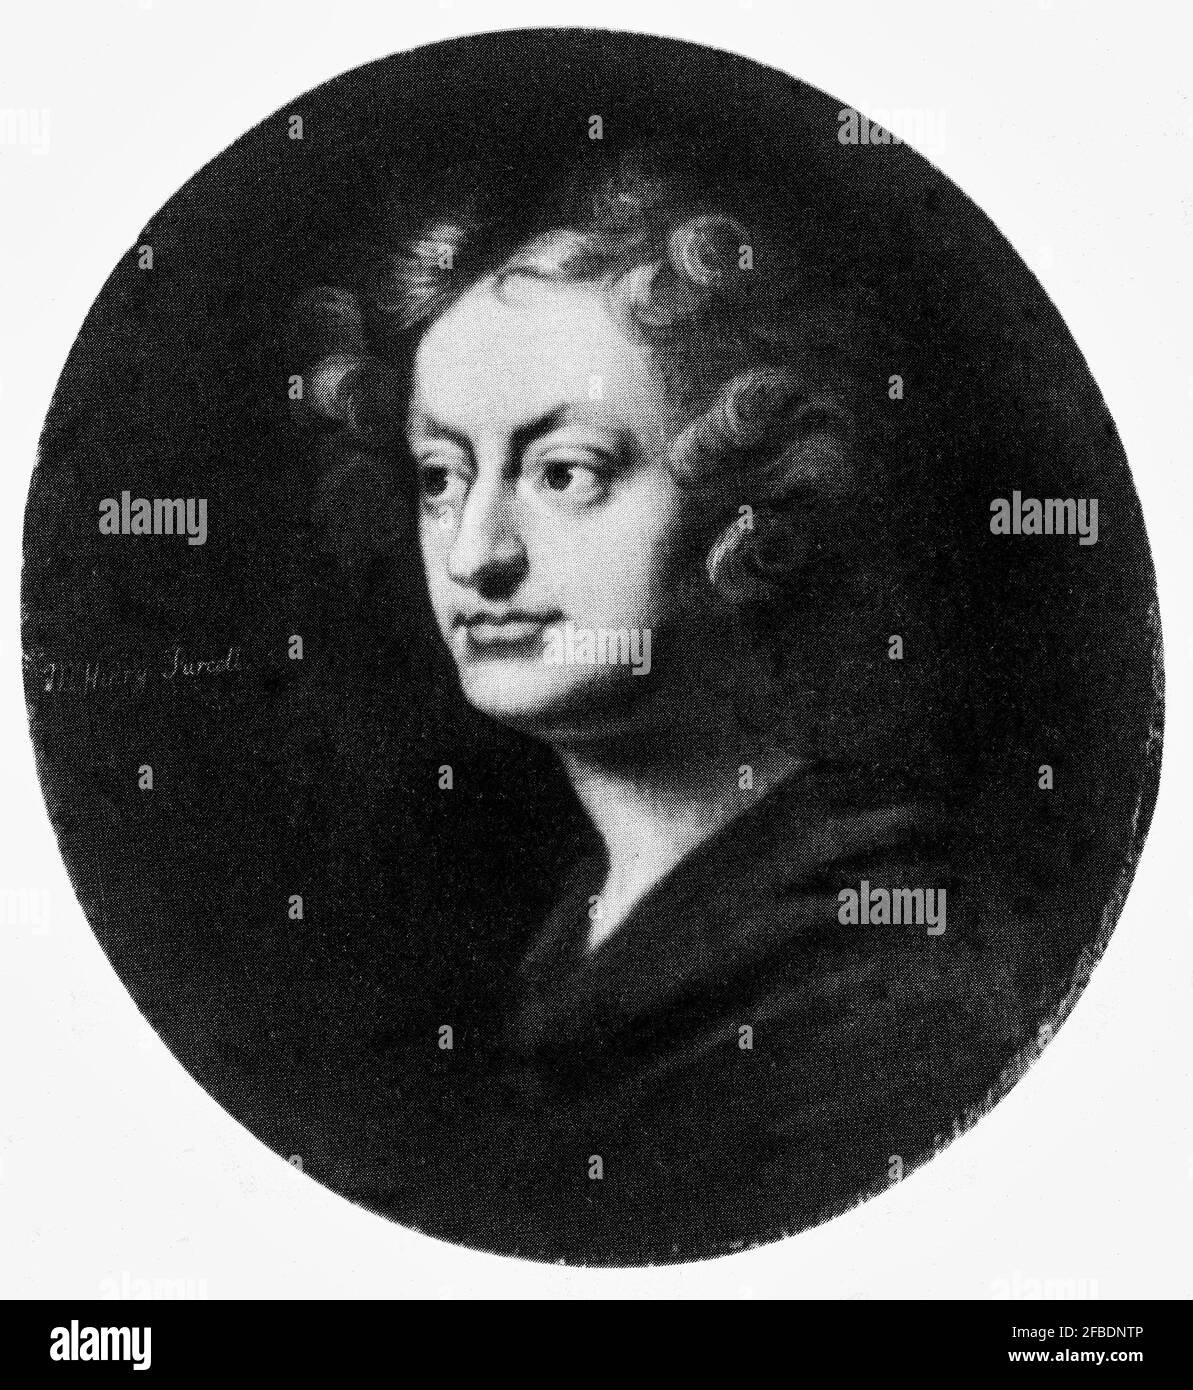 Henry Purcell (1659-1695) was an English composer  who incorporated Italian and French stylistic elements, to create a uniquely English form of Baroque music. He is generally considered to be one of the greatest English composers, who's work has influenced musicians of the 20th and 21st Centuries. Stock Photo